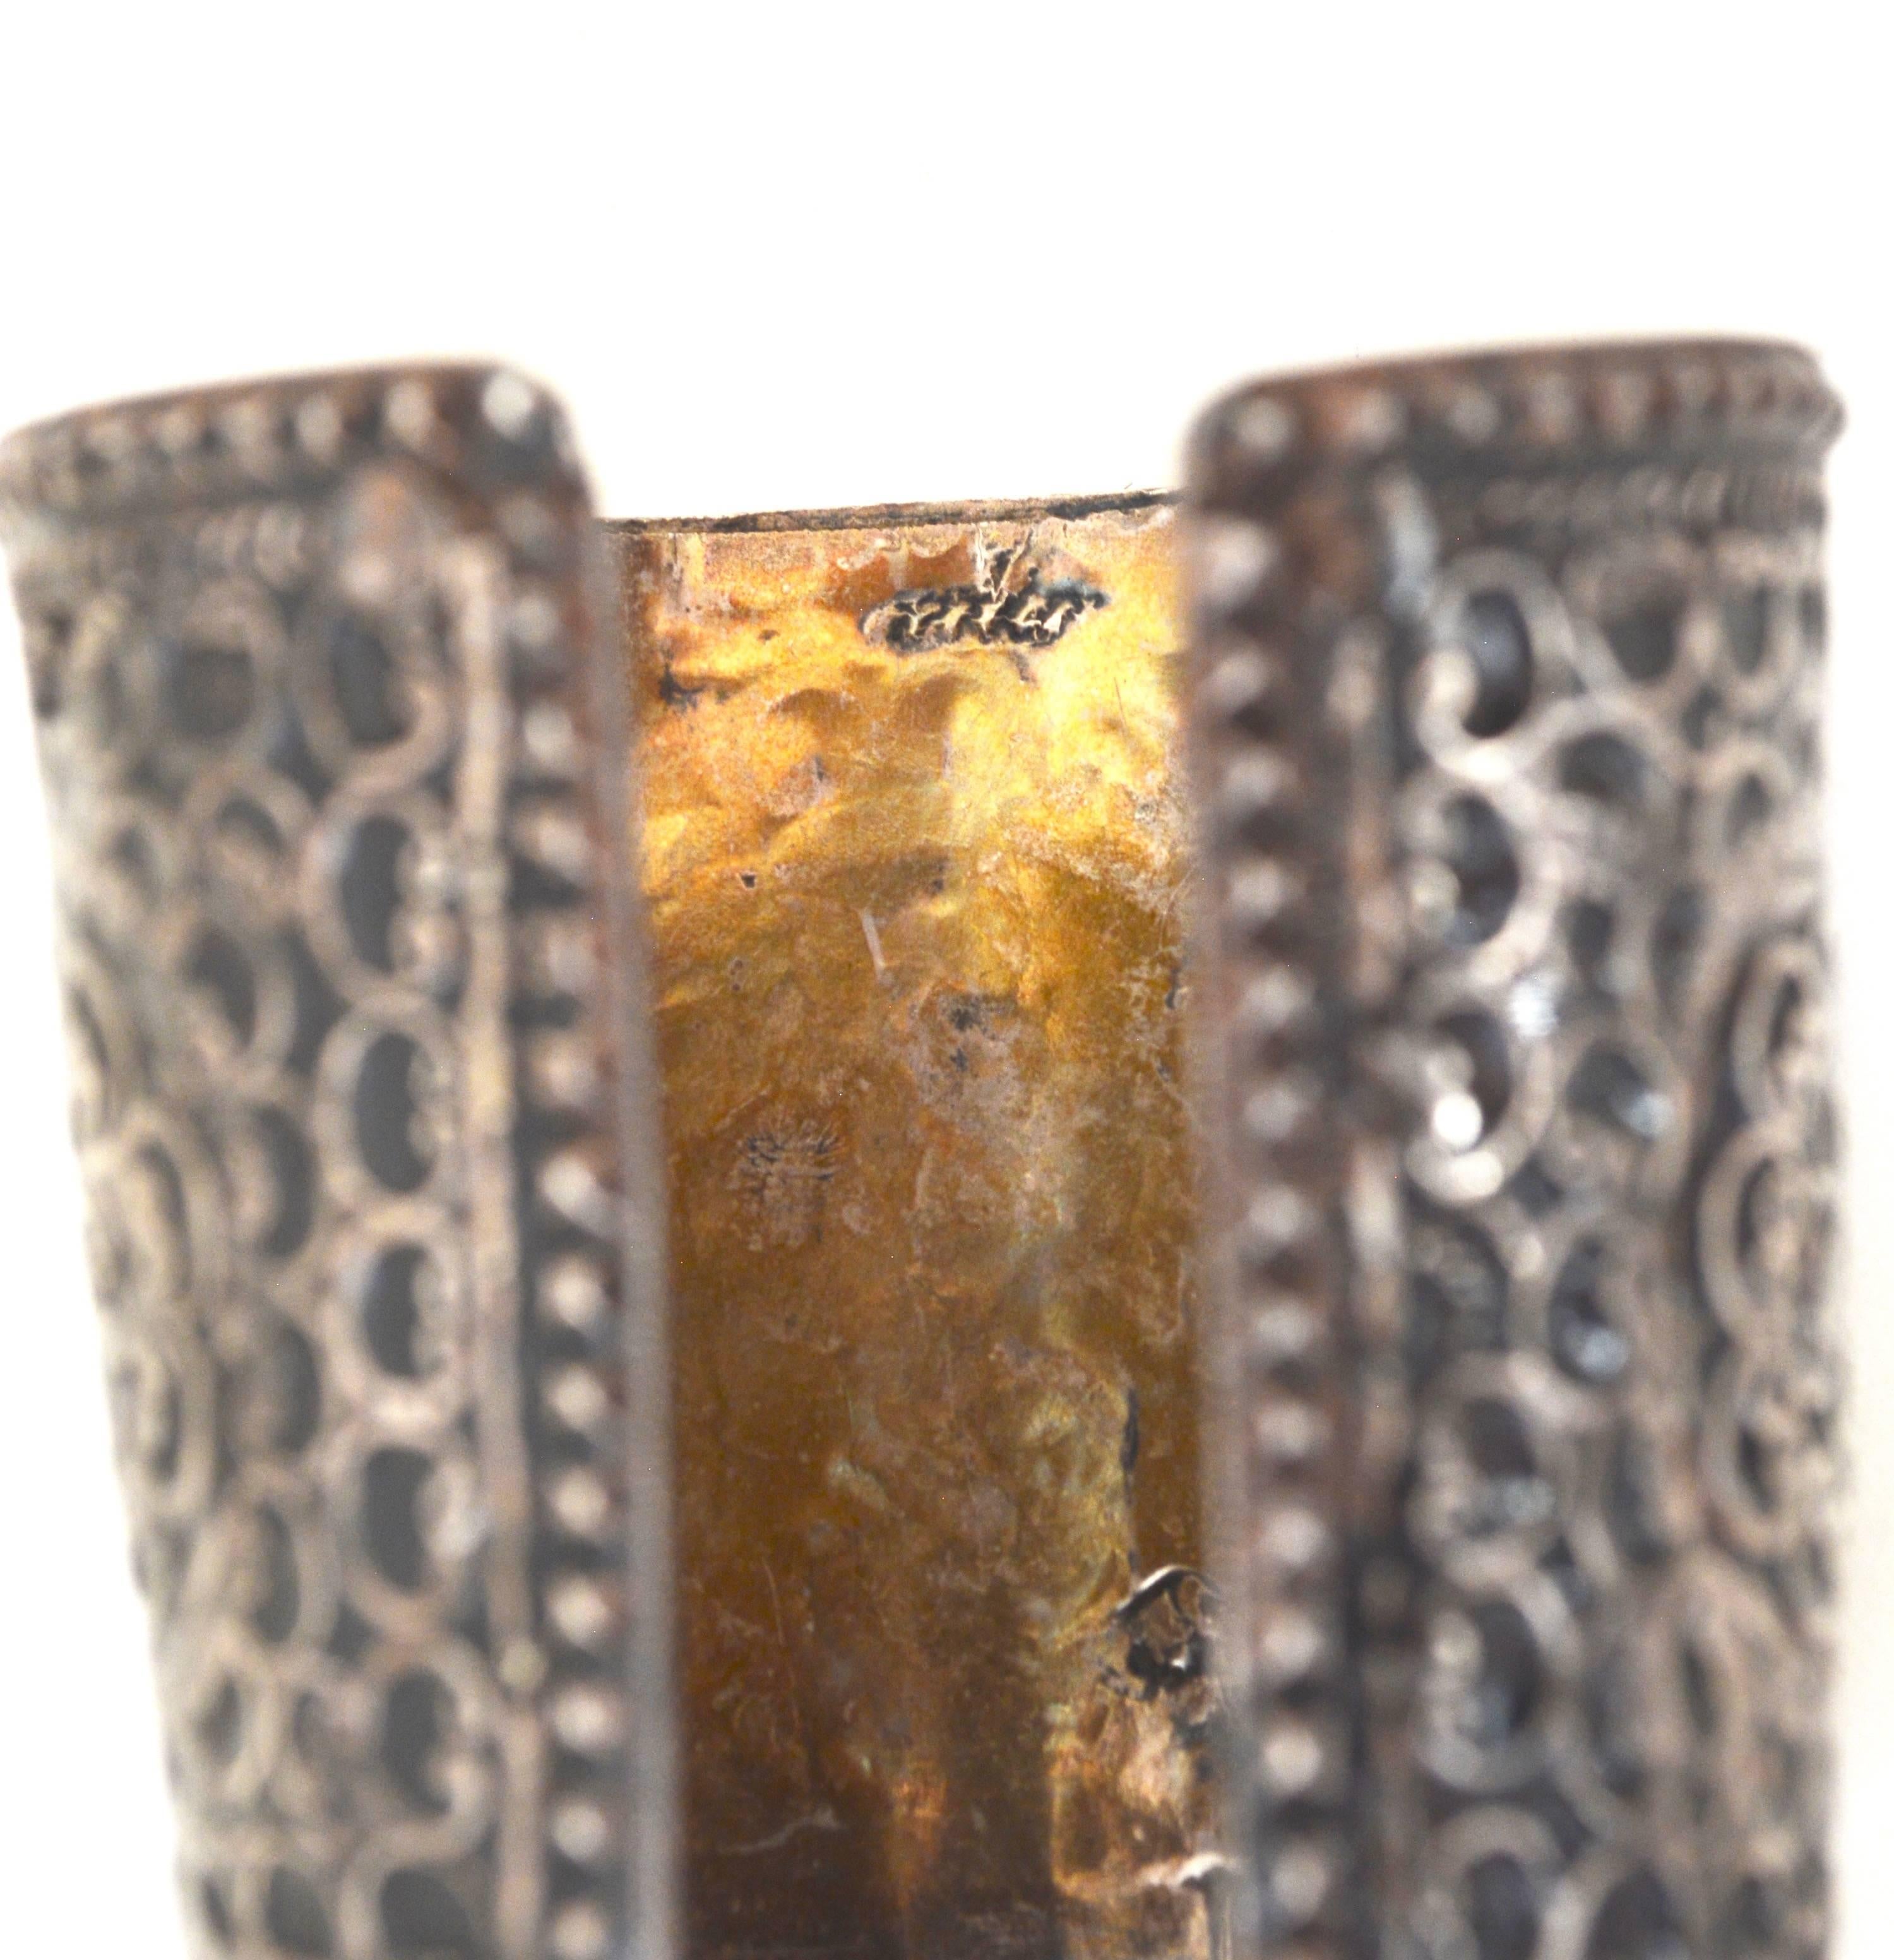 Pretty and intricately styled Berber cuff with some age. Appears to have enamel or black between the cut silver designs. Tested sterling according to the jeweler. It features studded detailing.  First opening is about 6.5" with flexibility and